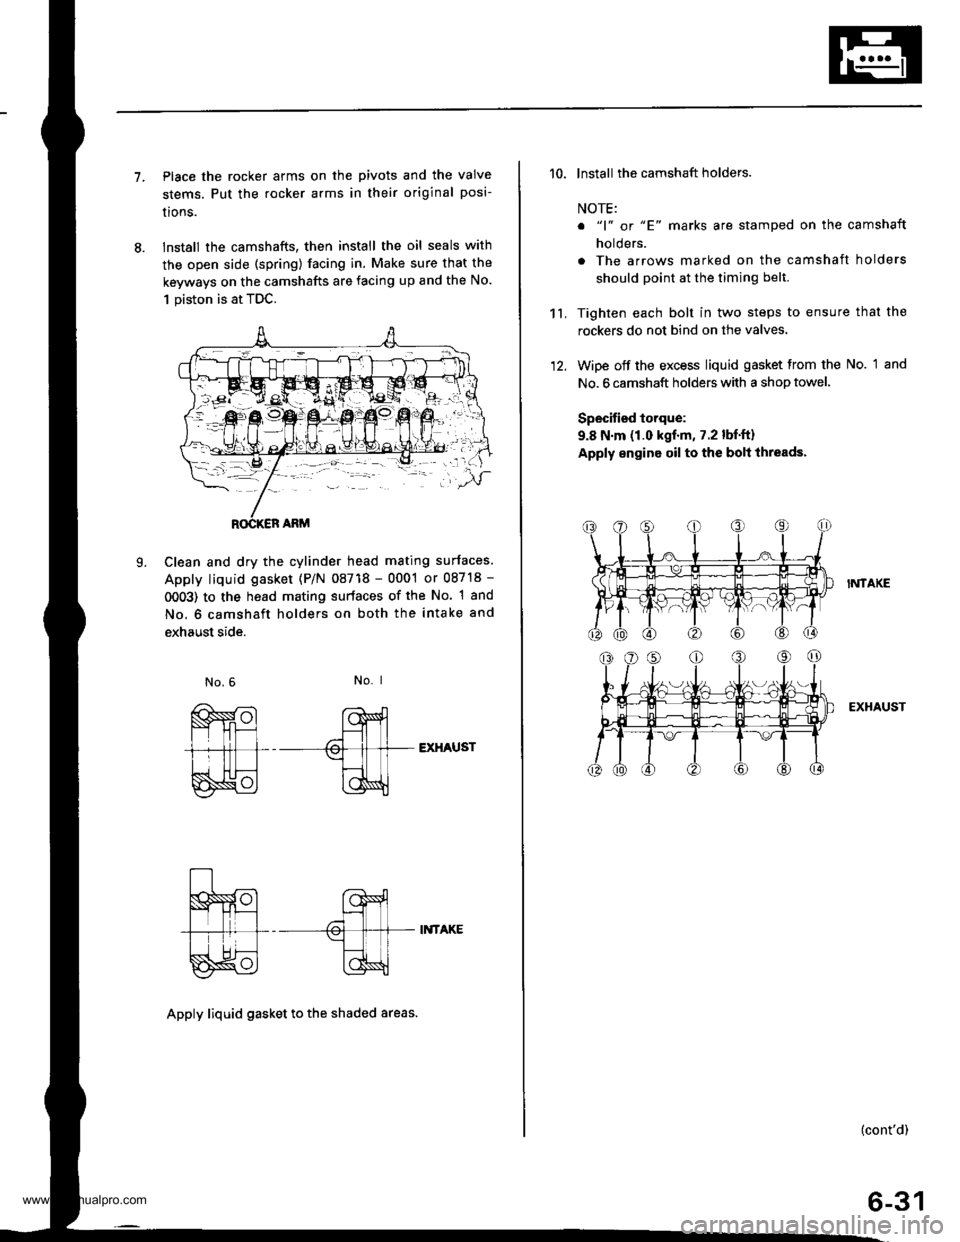 HONDA CR-V 1997 RD1-RD3 / 1.G User Guide 
7.Place the rocker arms on the pivots and the valve
stems. Put the rocker arms in their original posi-
lrons.
lnstall the camshafts, then install the oil seals with
the open side (spring) facing in. 